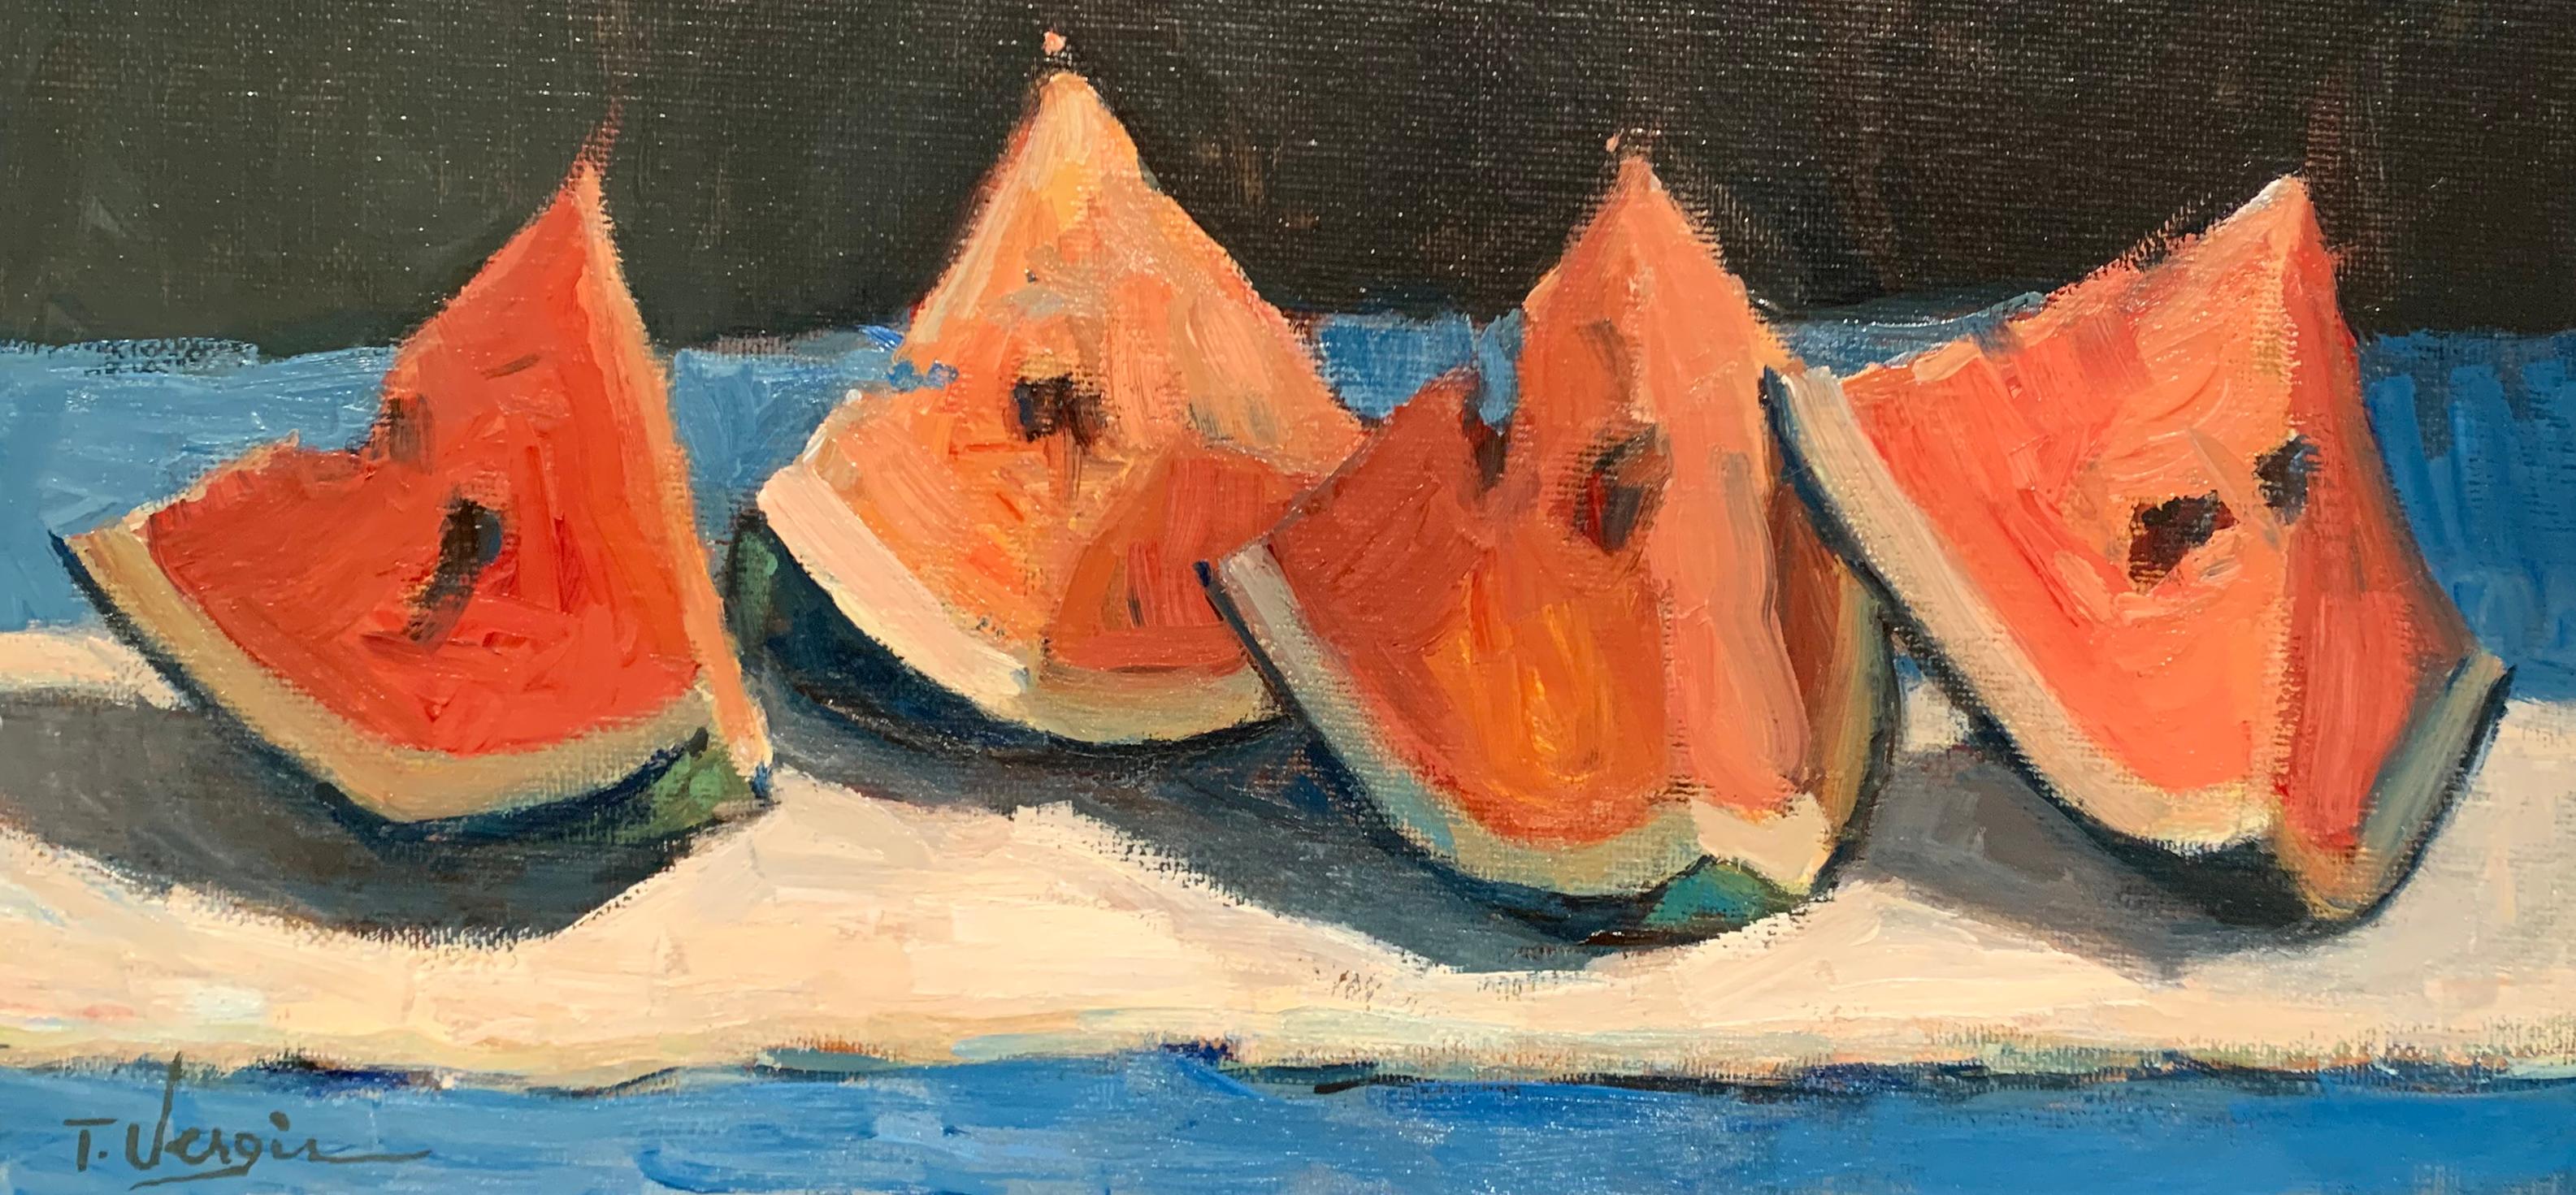 "End of Season Watermelon" is an 6" x 12" oil on canvas, mounted to board, food still life painting from 2019 by American artist Trisha Vergis. It is signed "T. Vergis" in the lower left.
Trisha Vergis, born in 1962, is a painter, master woodcarver,